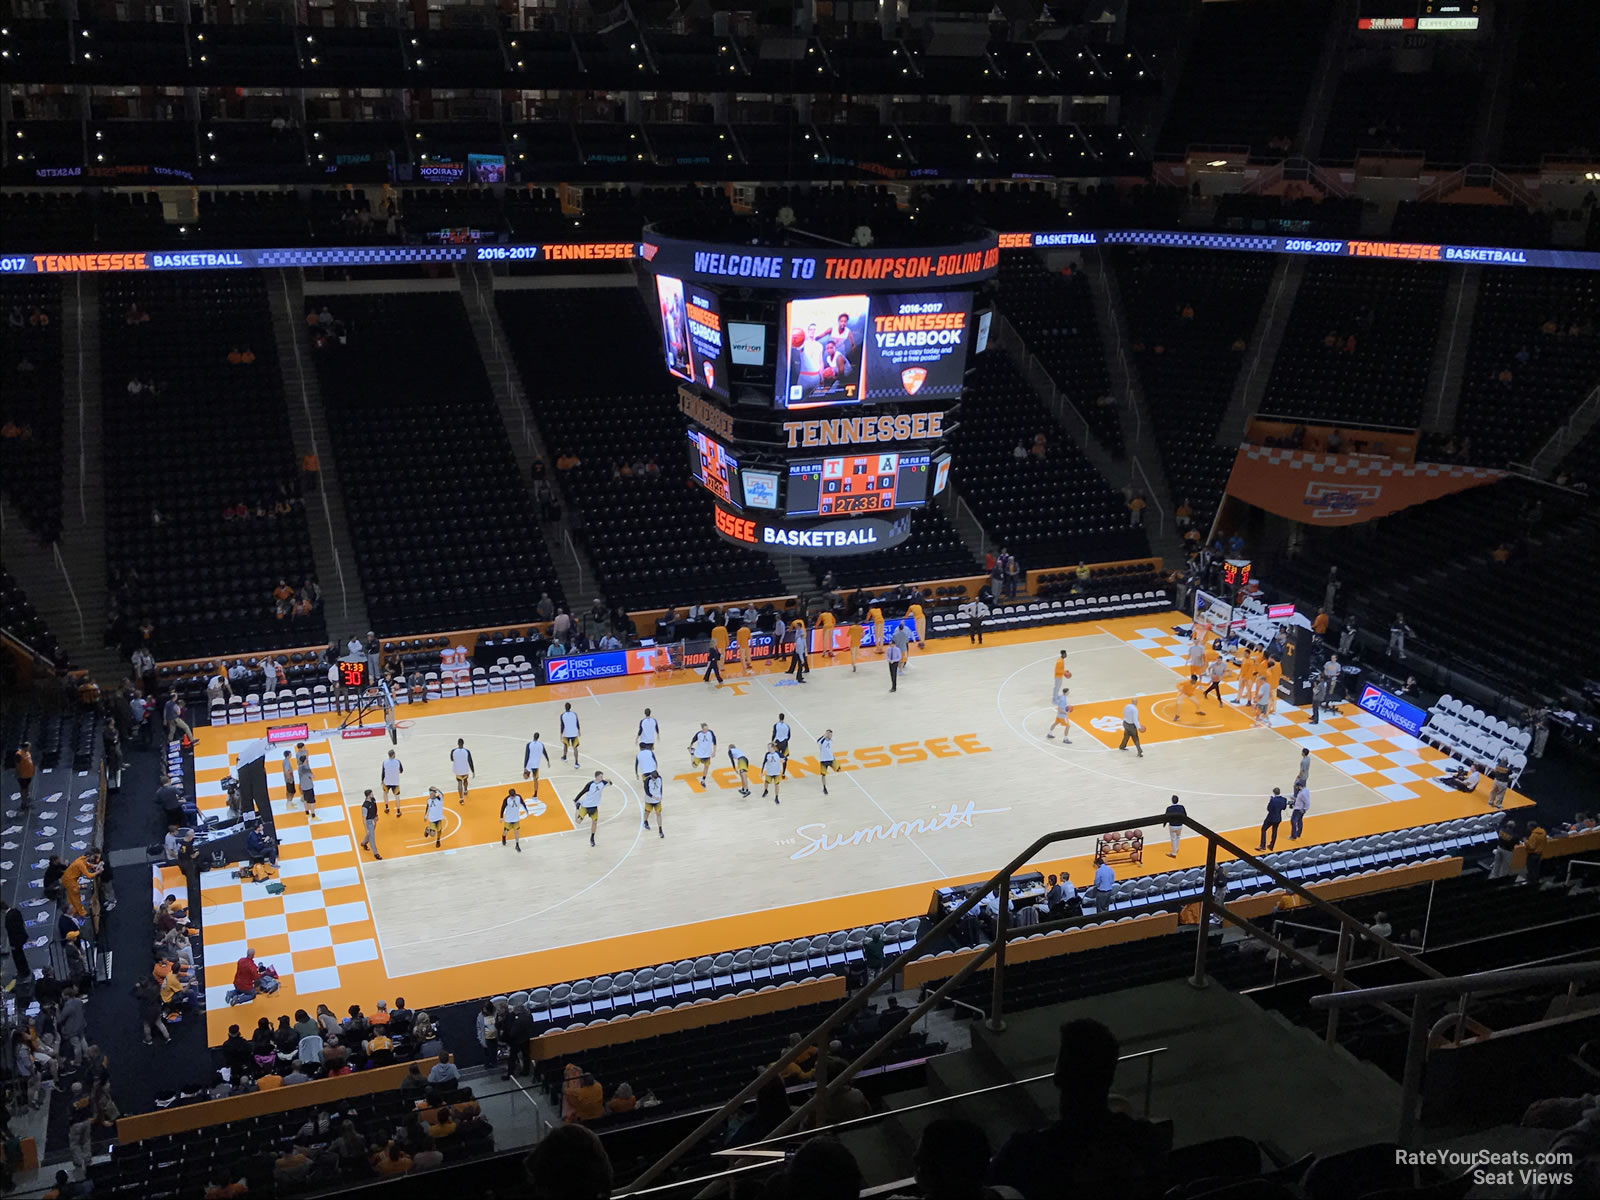 section 323, row 7 seat view  - thompson-boling arena